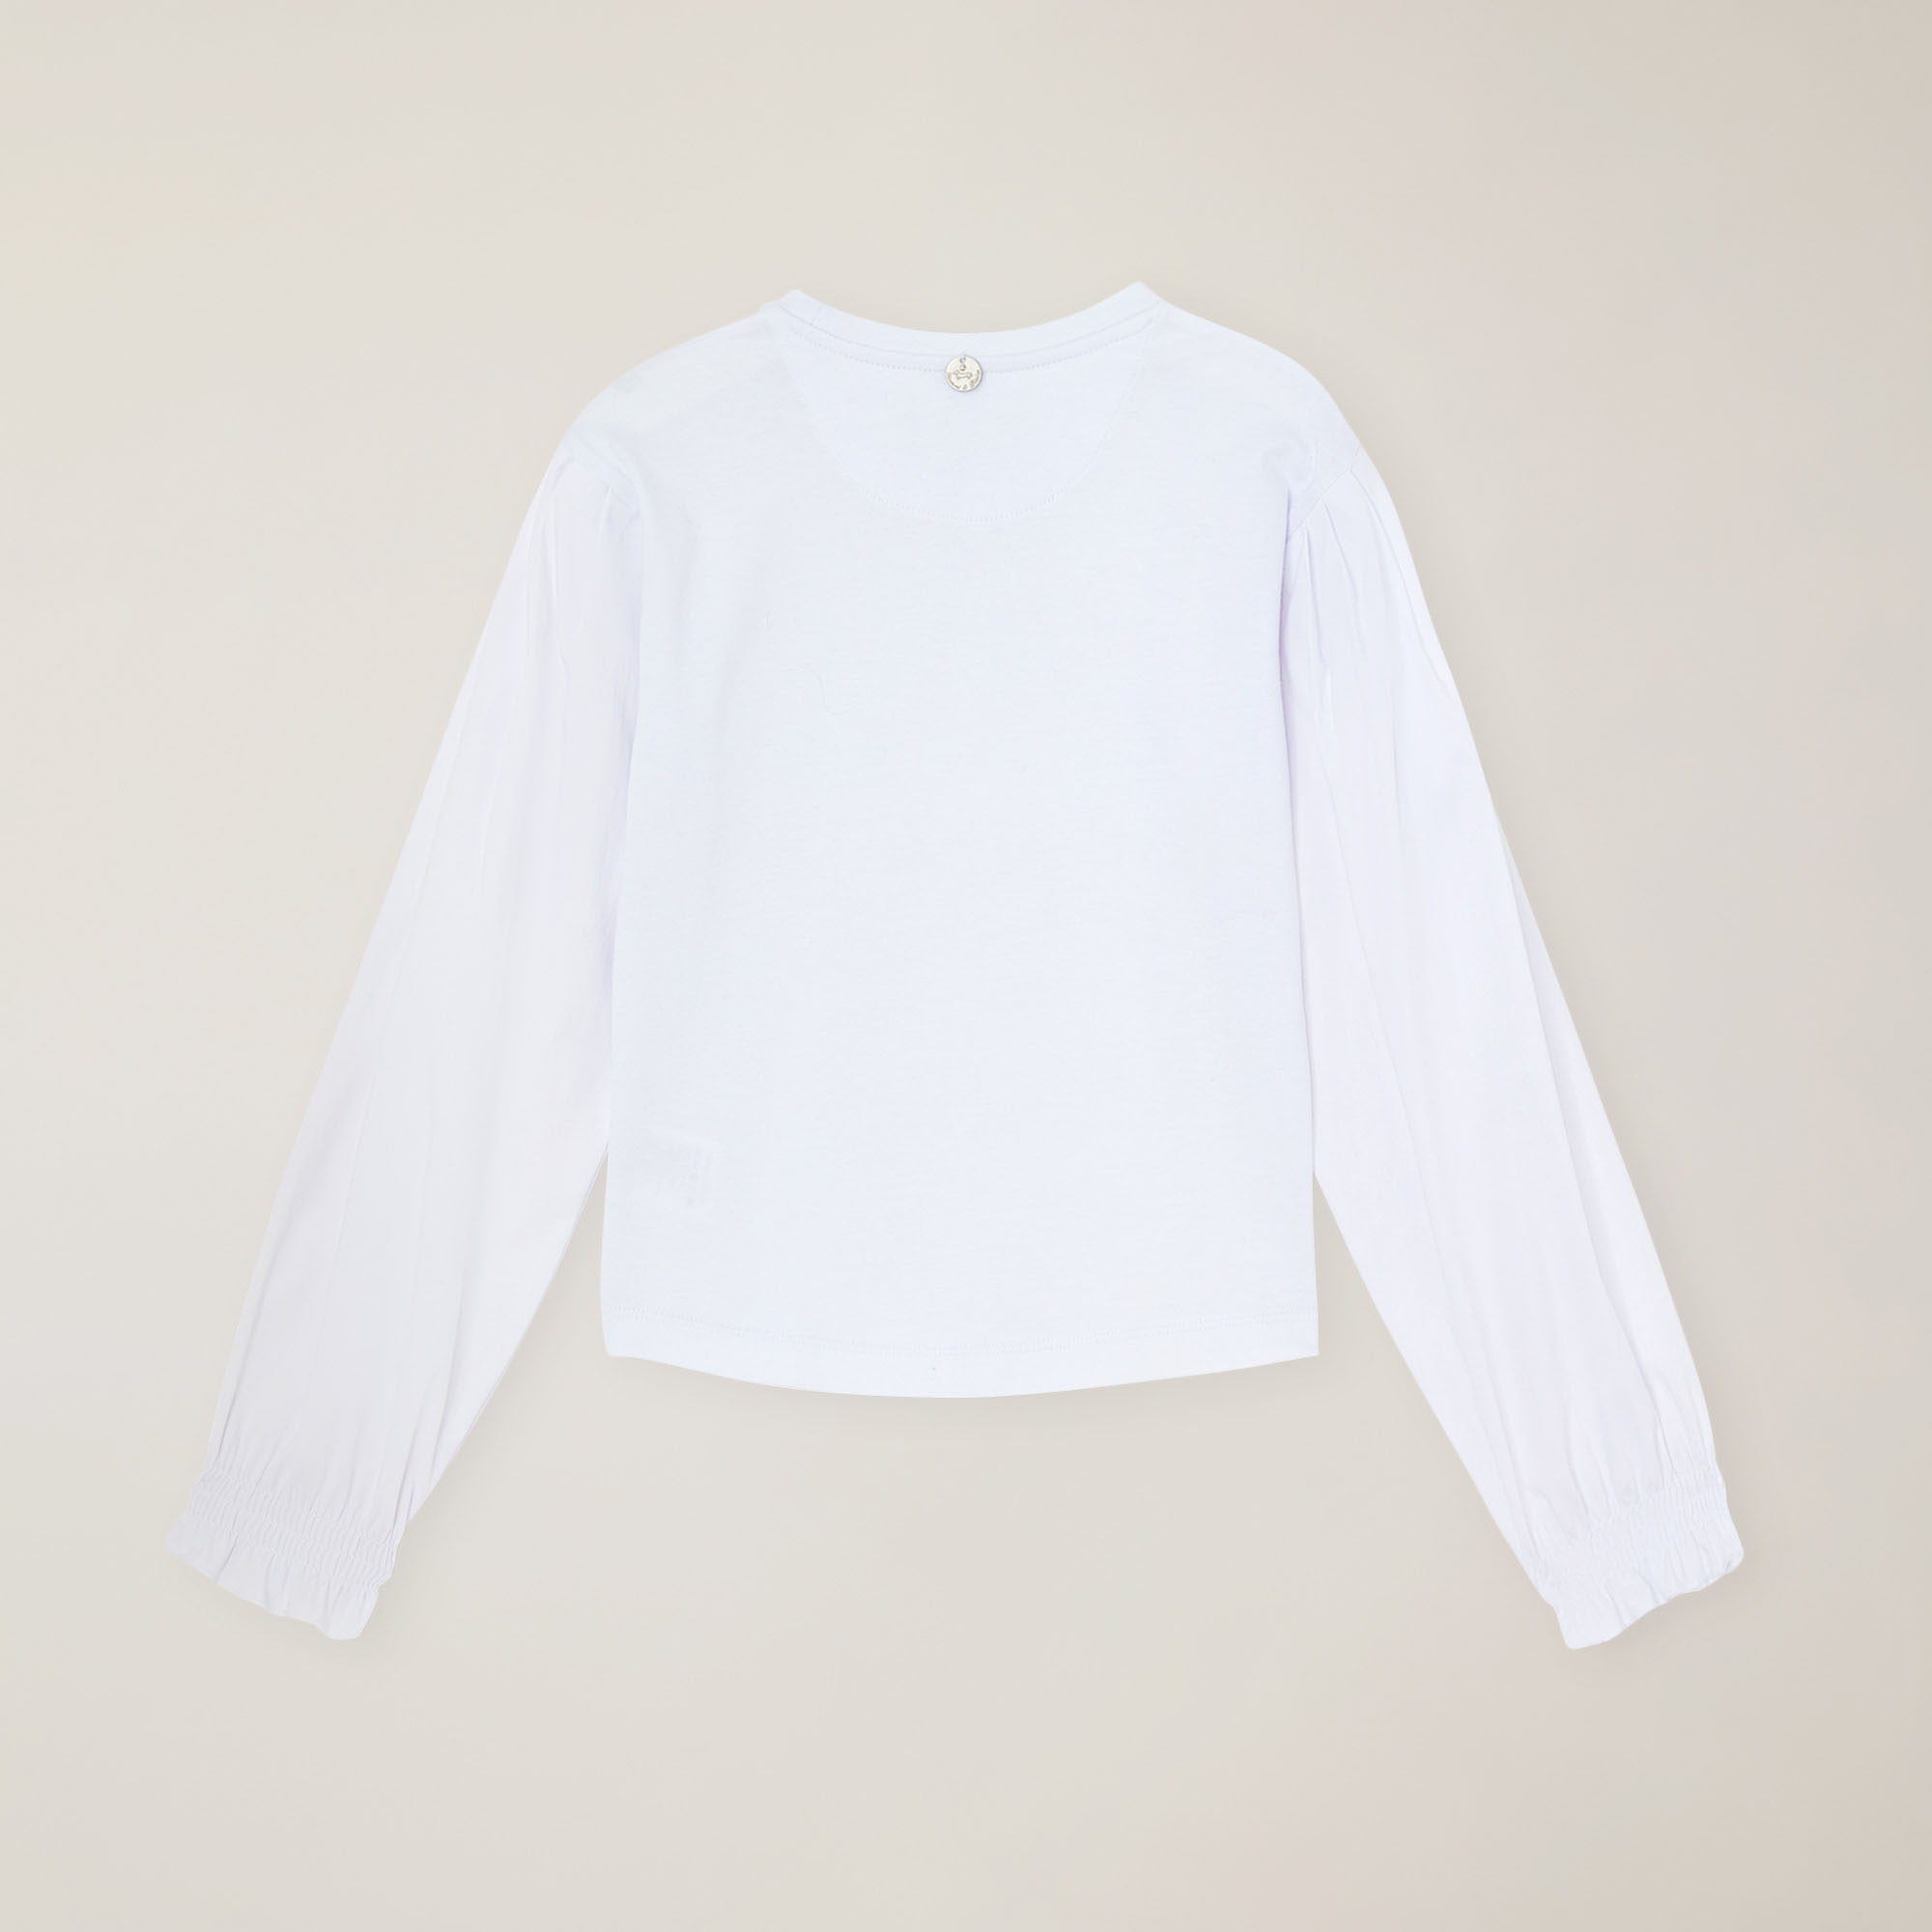 Jersey t-shirt with poplin sleeves